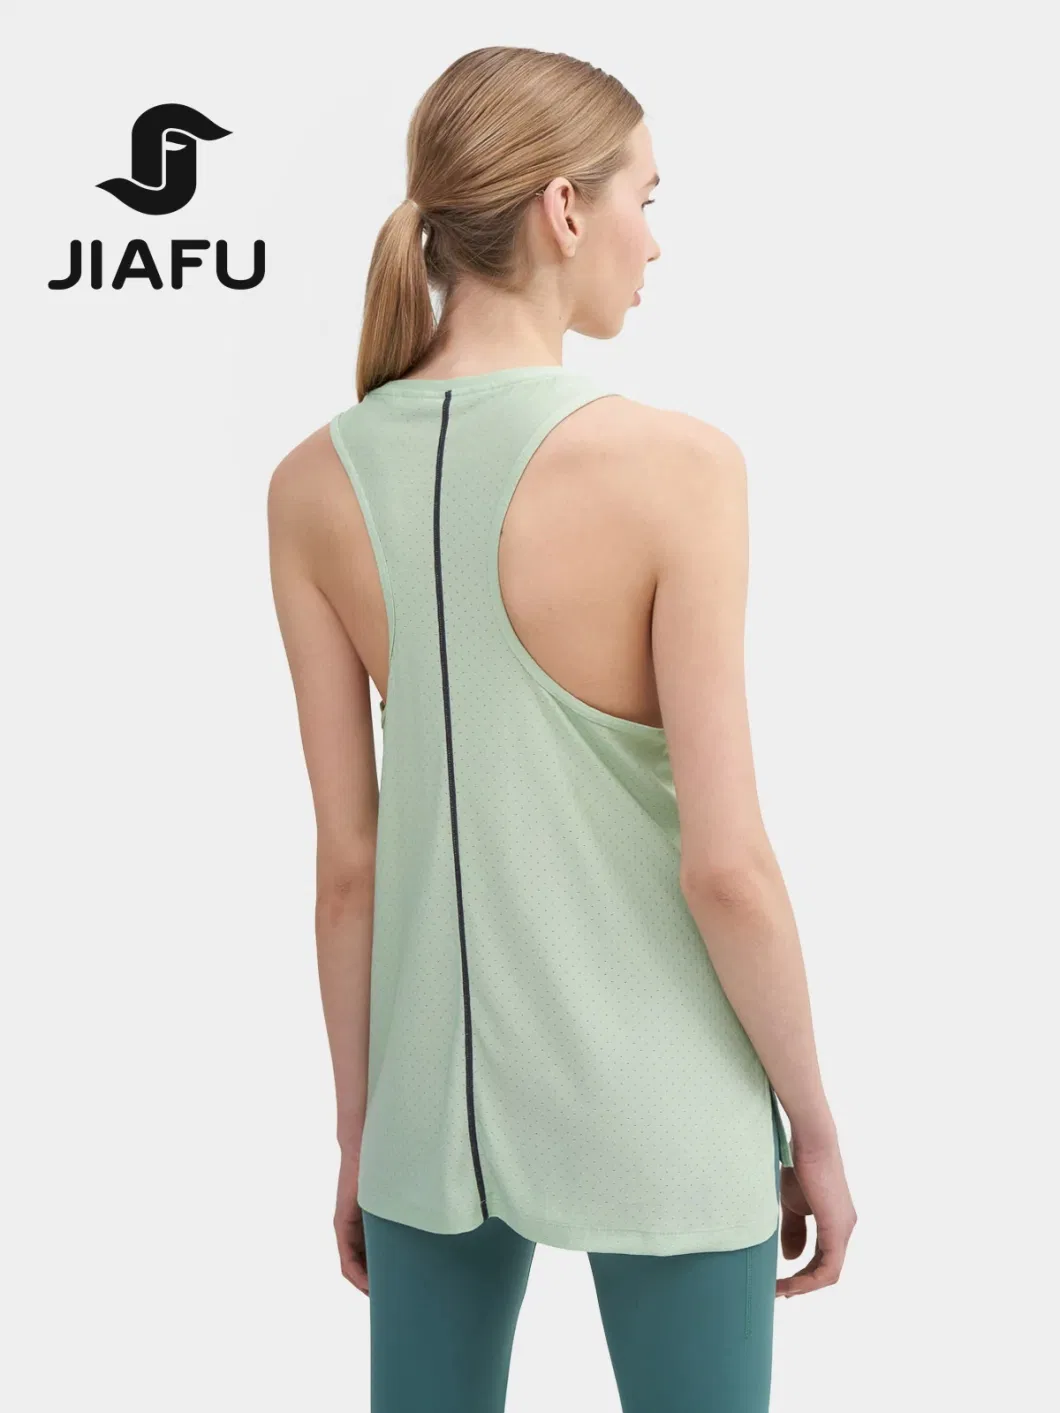 Summer Active Wear Women&prime;s Breathable Quick Dry Sports Running Top Vest